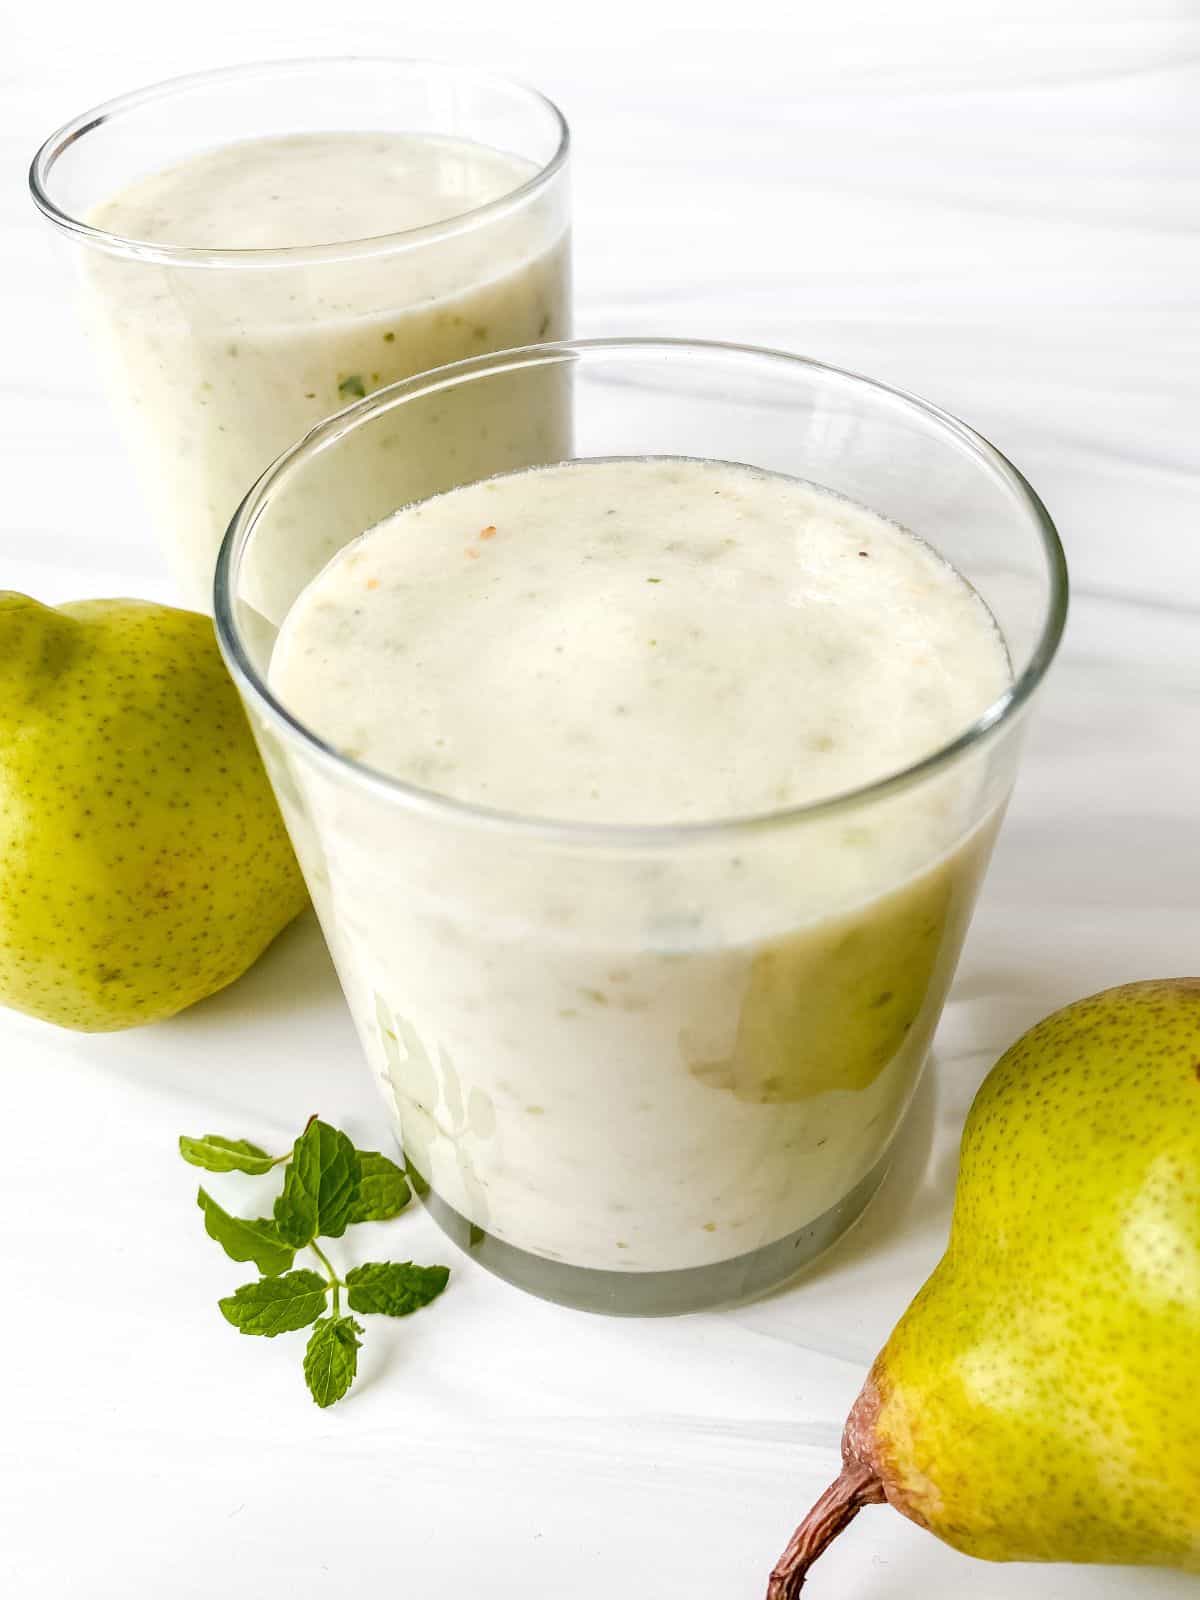 two glasses of lychee smoothie next to pears.